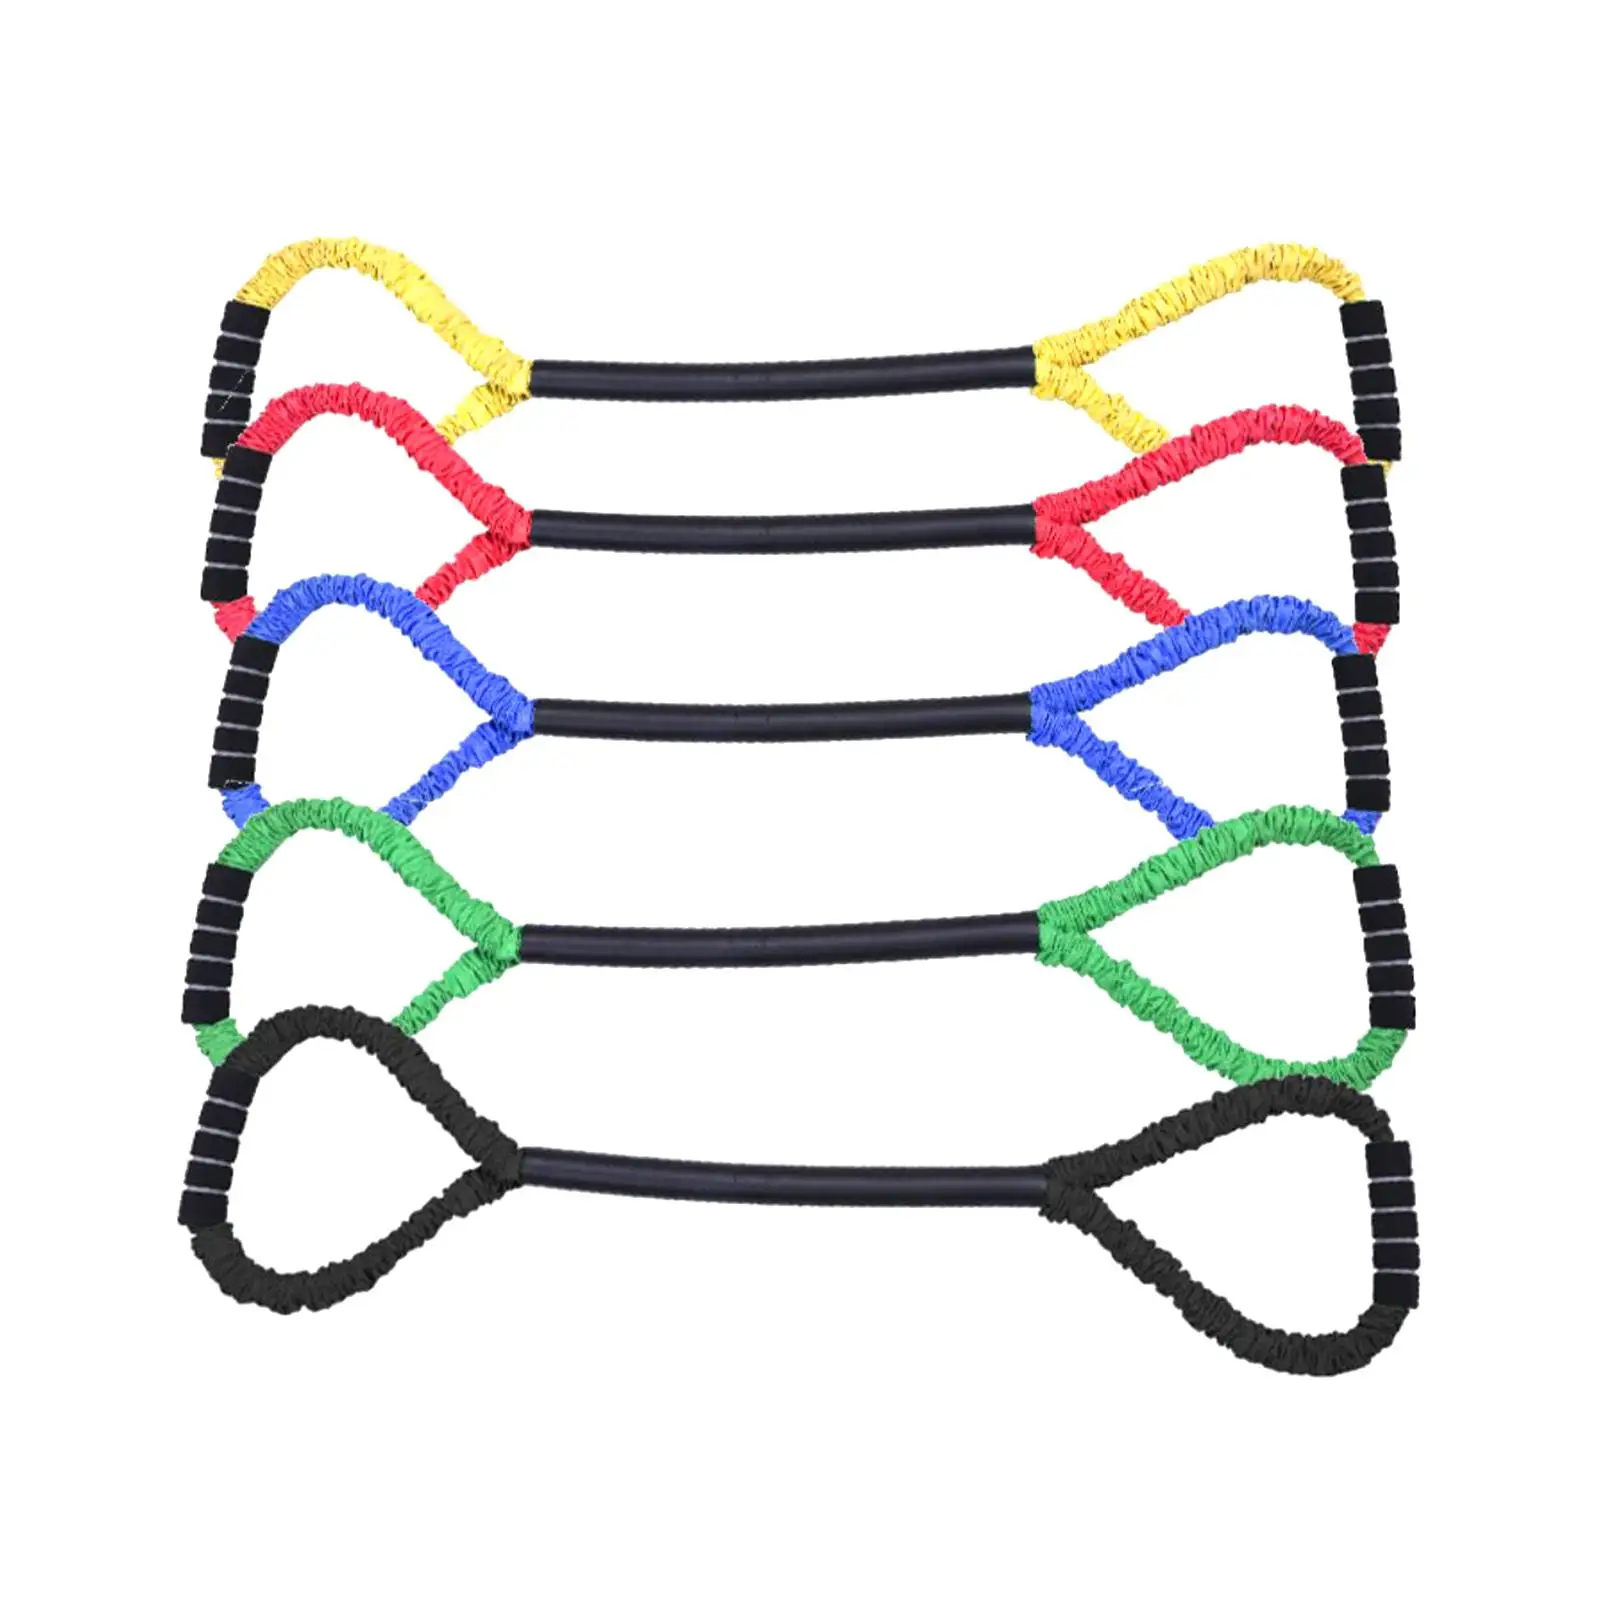 Boxing Resistance Band Exercise Bands Sports Resistance Bands Chest Expander Karate Training Elastic Bands Workout Equipment